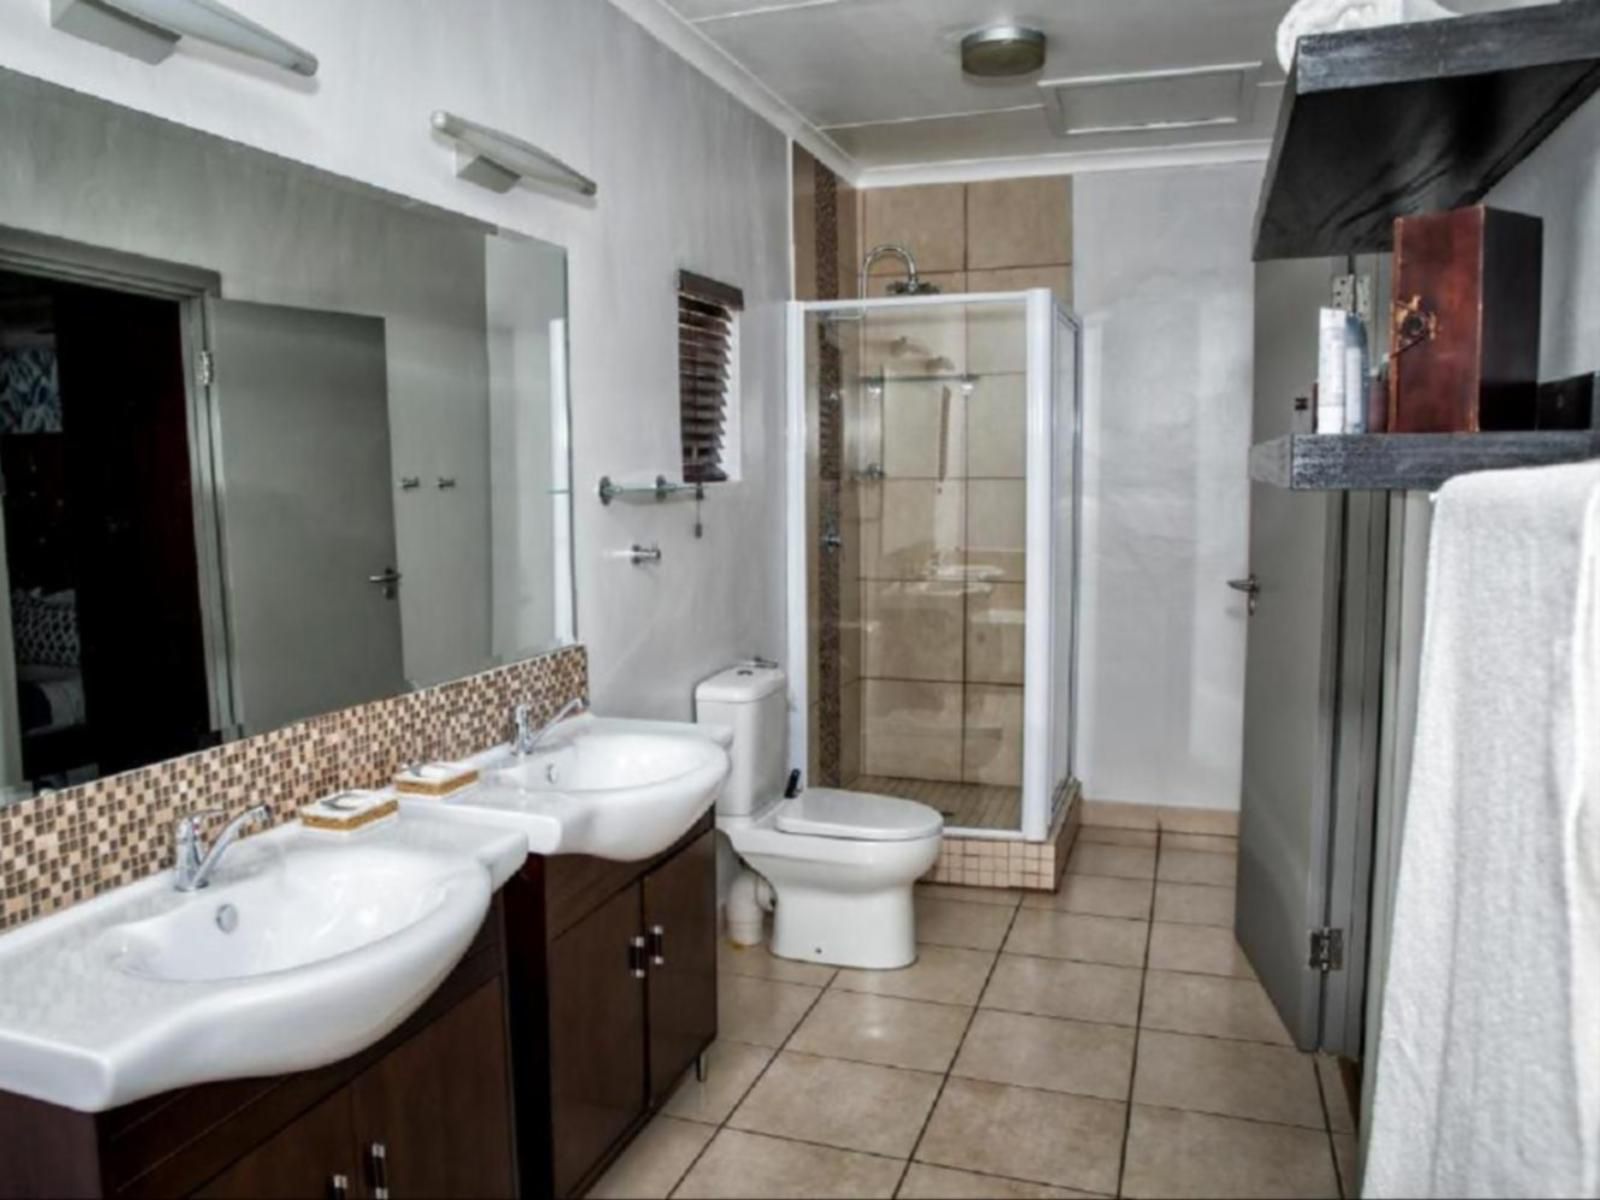 Browns Manor Upington Northern Cape South Africa Unsaturated, Bathroom